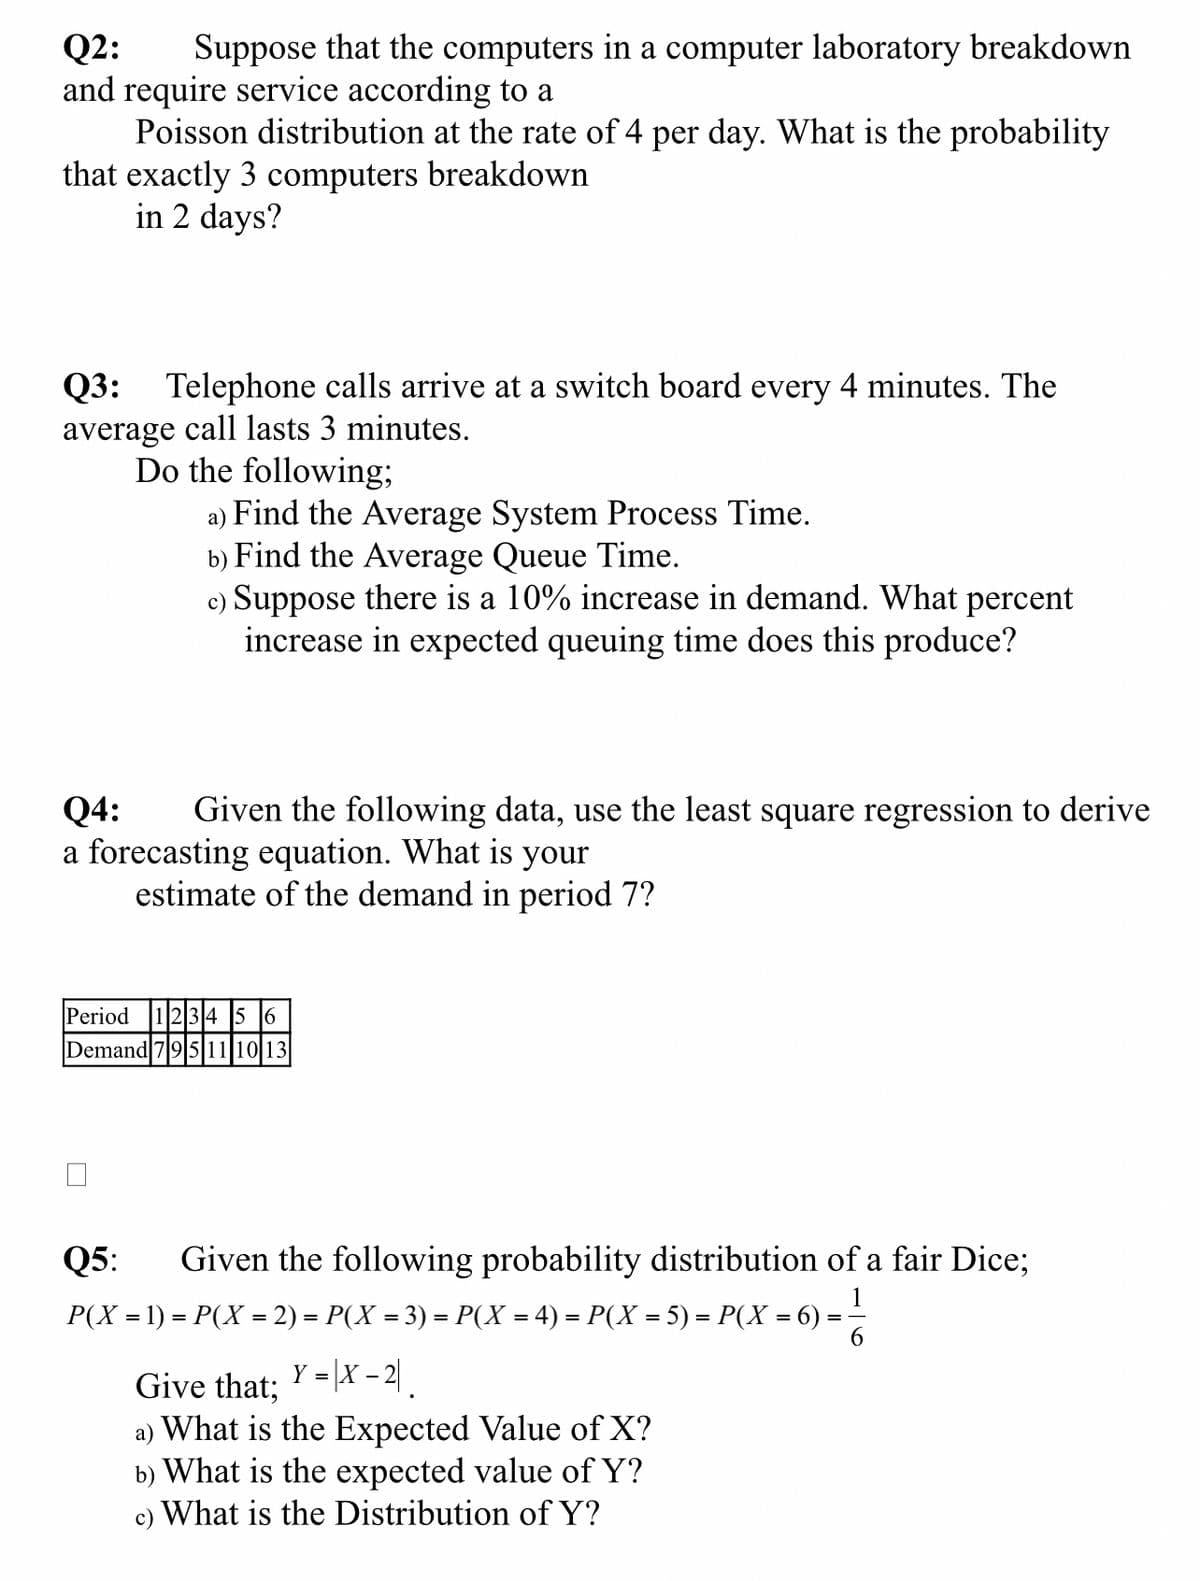 Q2: Suppose that the computers in a computer laboratory breakdown
and require service according to a
Poisson distribution at the rate of 4 per day. What is the probability
that exactly 3 computers breakdown
in 2 days?
Q3: Telephone calls arrive at a switch board every 4 minutes. The
average call lasts 3 minutes.
Do the following;
a) Find the Average System Process Time.
b) Find the Average Queue Time.
c) Suppose there is a 10% increase in demand. What percent
increase in expected queuing time does this produce?
Q4: Given the following data, use the least square regression to derive
a forecasting equation. What is your
estimate of the demand in period 7?
Period 123456
Demand 795 11 10 13
Q5: Given the following probability distribution of a fair Dice;
1
P(X = 1) = P(X = 2) = P(X = 3) = P(X = 4) = P(X = 5) = P(X = 6) =
Give that; Y-X-2
=
|X
¸
a) What is the Expected Value of X?
b) What is the expected value of Y?
c) What is the Distribution of Y?